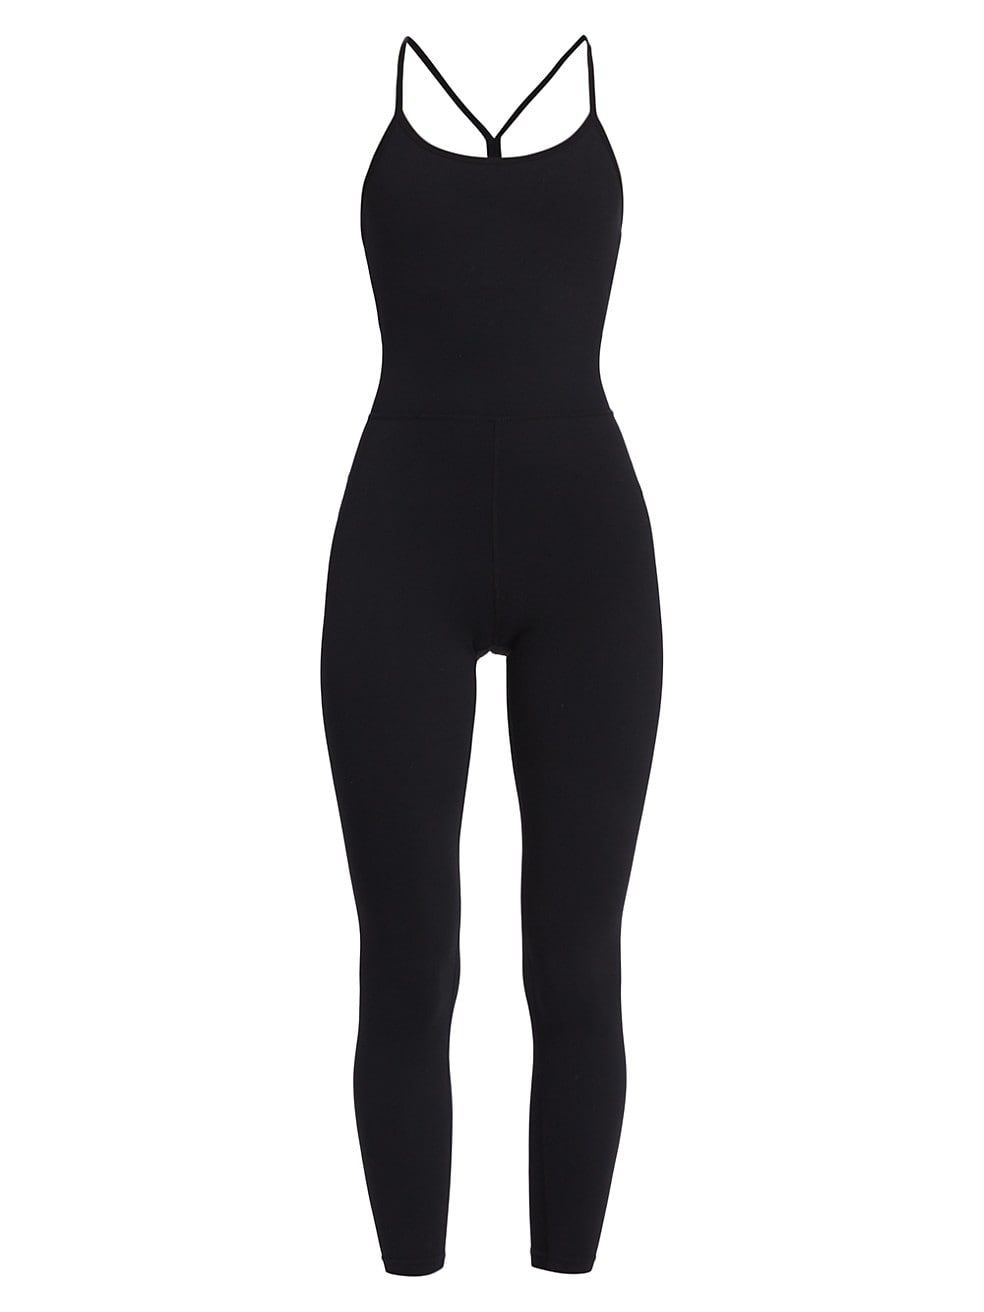 Airweight Jersey Jumpsuit | Saks Fifth Avenue